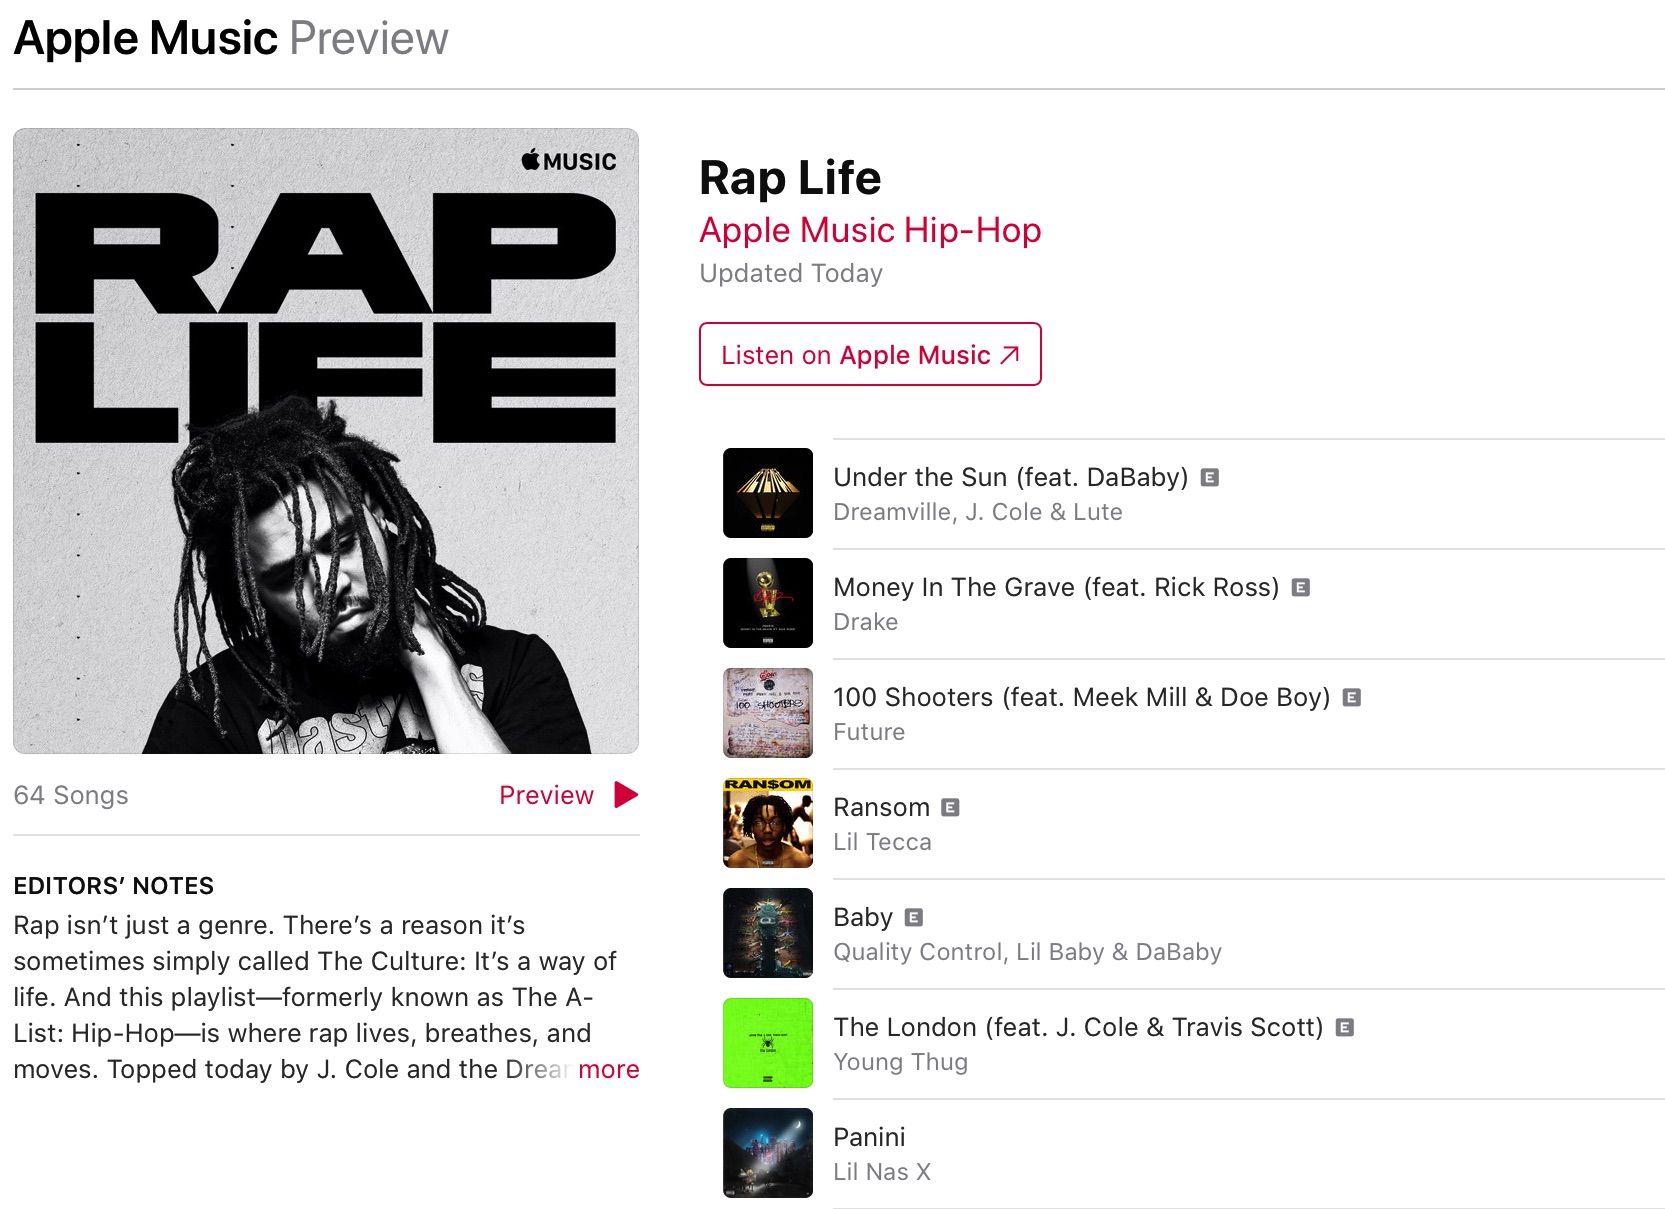 Apple Music's focus on hip-hop continues.